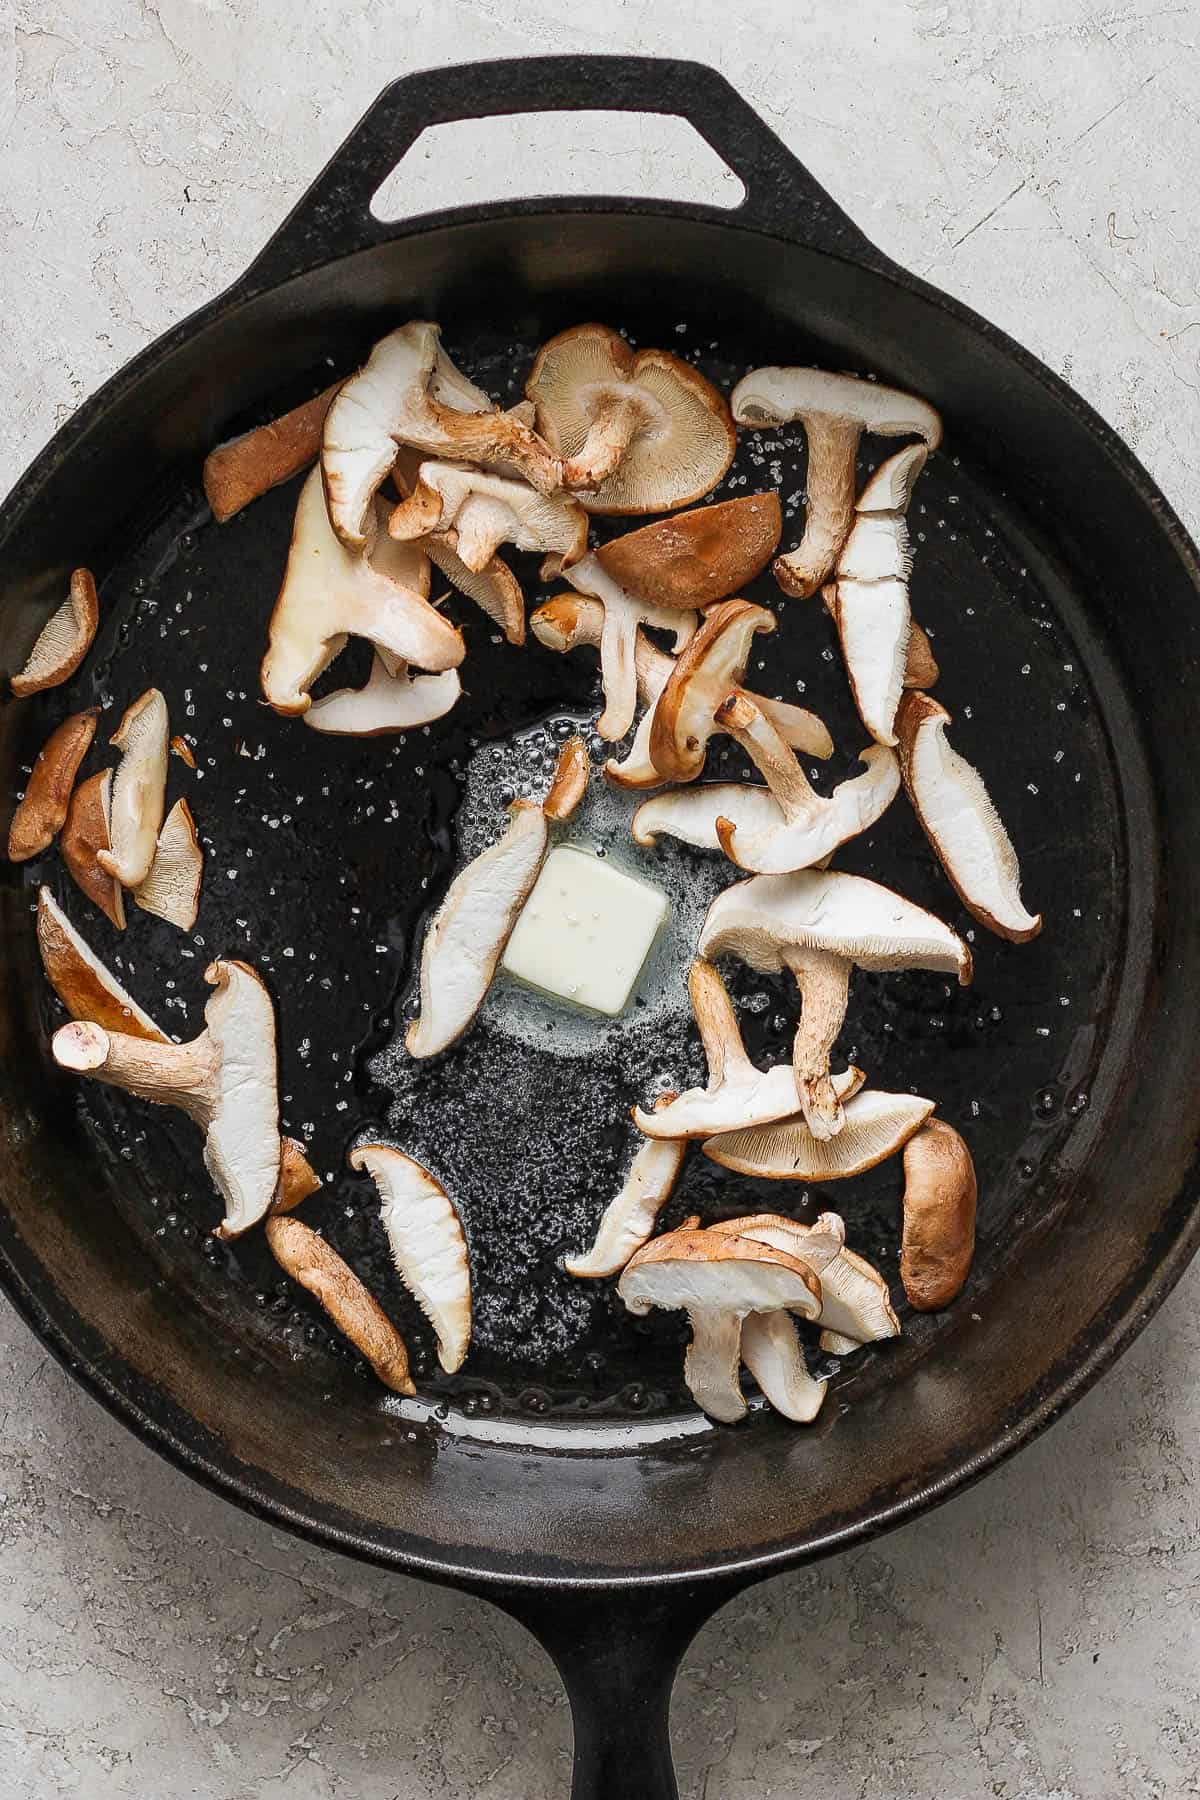 Shiitake mushrooms in a cast iron skillet with melted butter and salt.